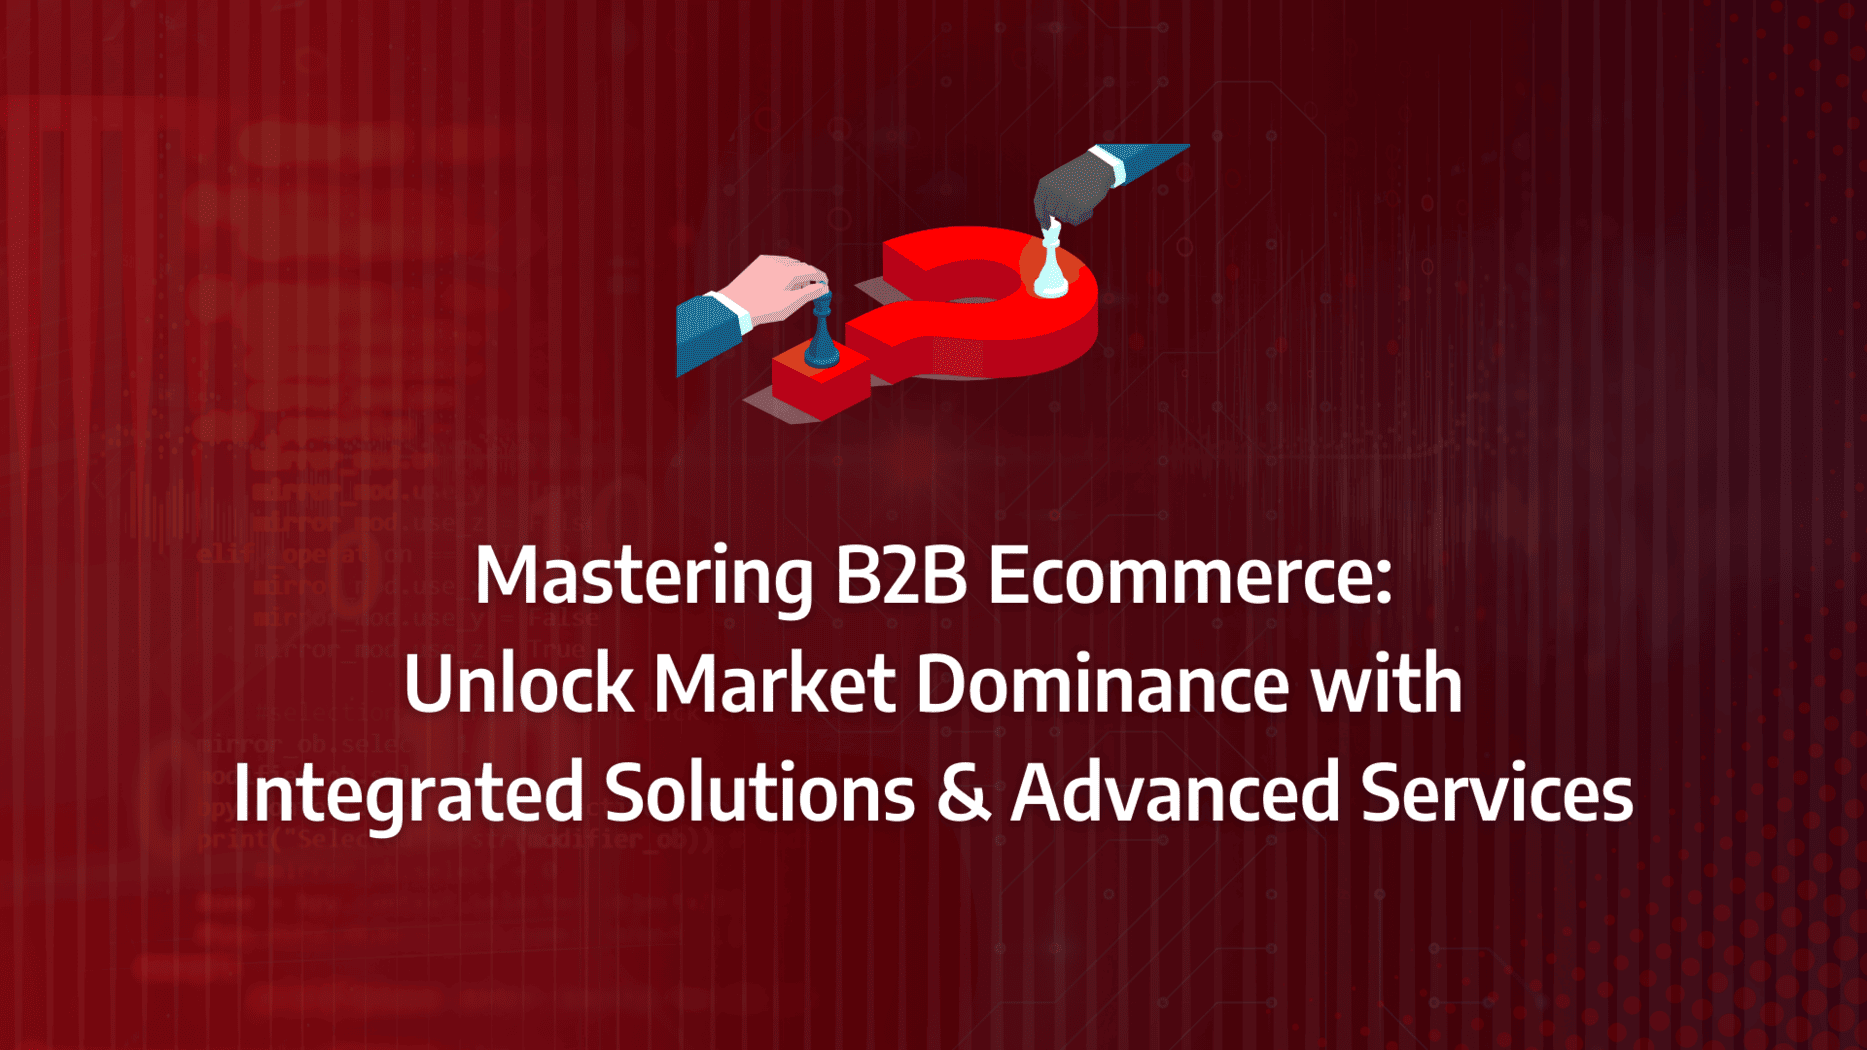 B2B ecommerce: driving market dominance through integrated ecommerce solutions, enhanced services, and robust system infrastructure.: strategy framework diagram for b2b ecommerce solutions, b2b ecommerce system, b2b ecommerce services, b2b ecommerce system